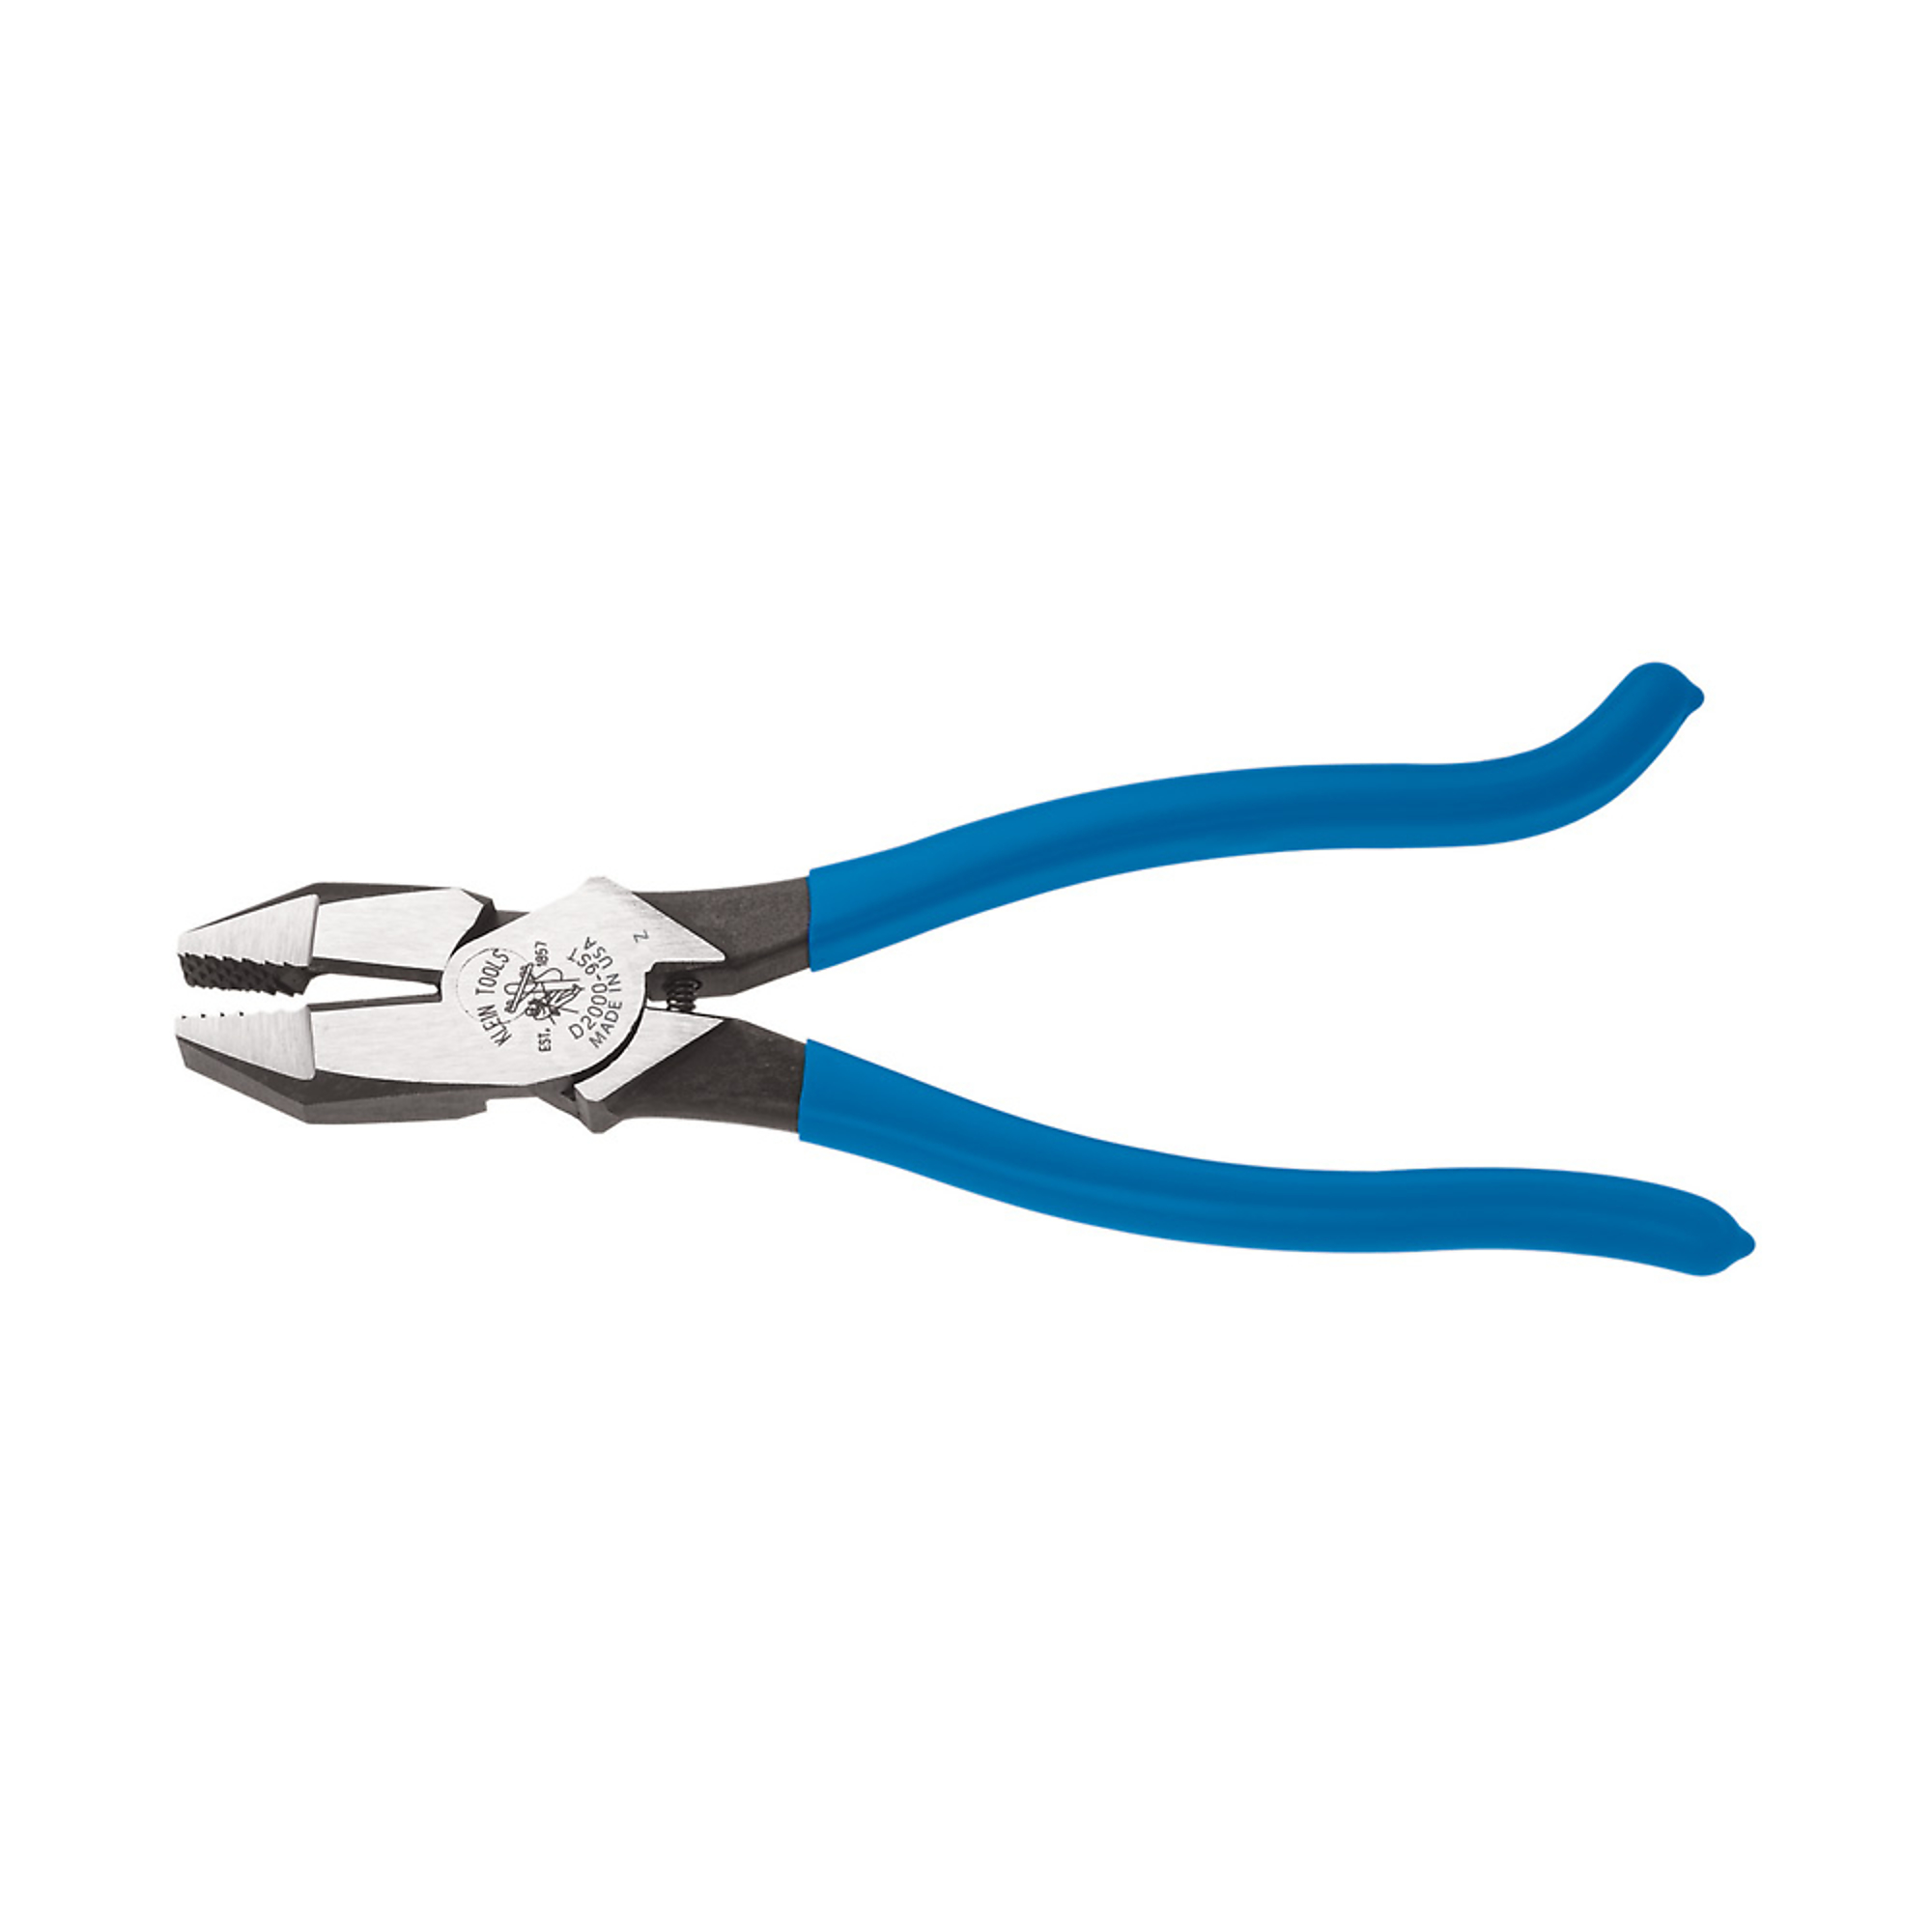 Klein Tools, Ironworker's Pliers, Heavy-Duty Cutting, 9Inch, Pieces (qty.) 1 Material Steel, Jaw Capacity 1.25 in, Model D2000-9ST